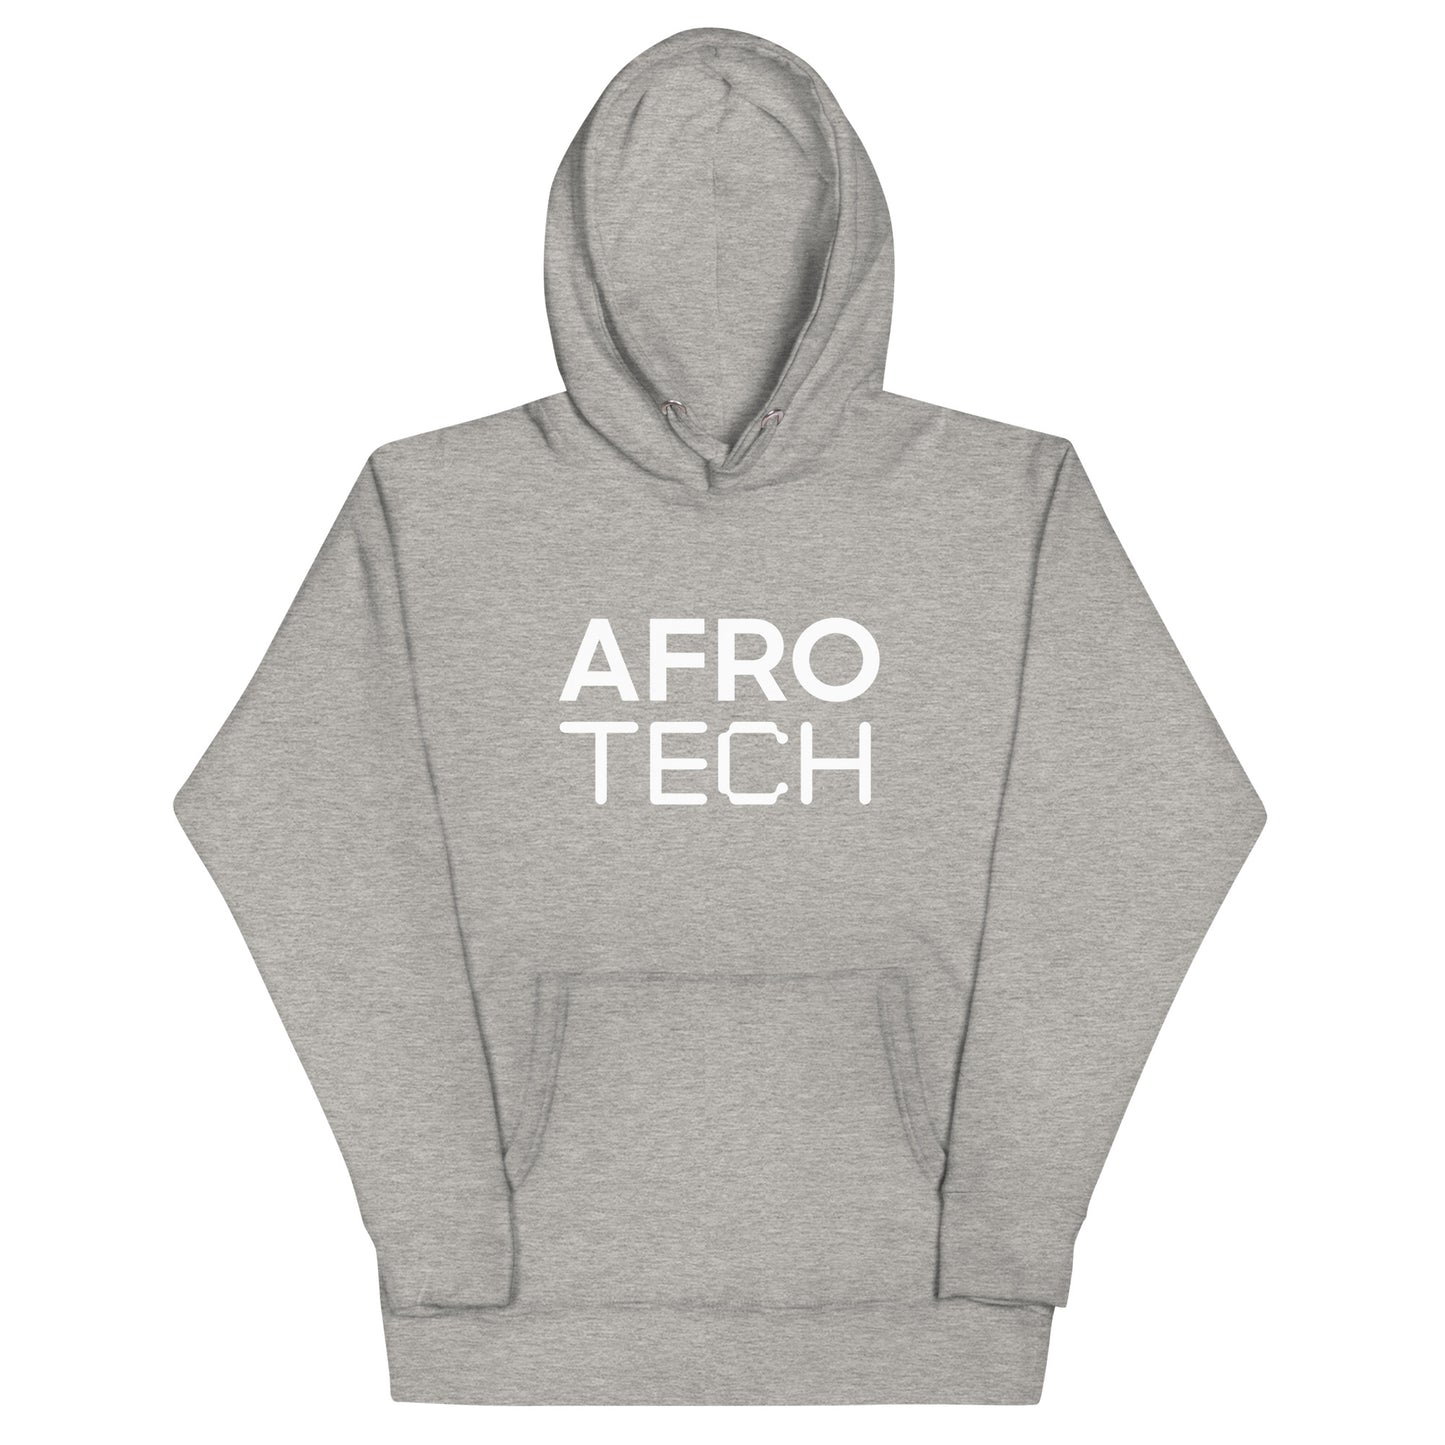 AfroTech '21 Unisex Hoodie